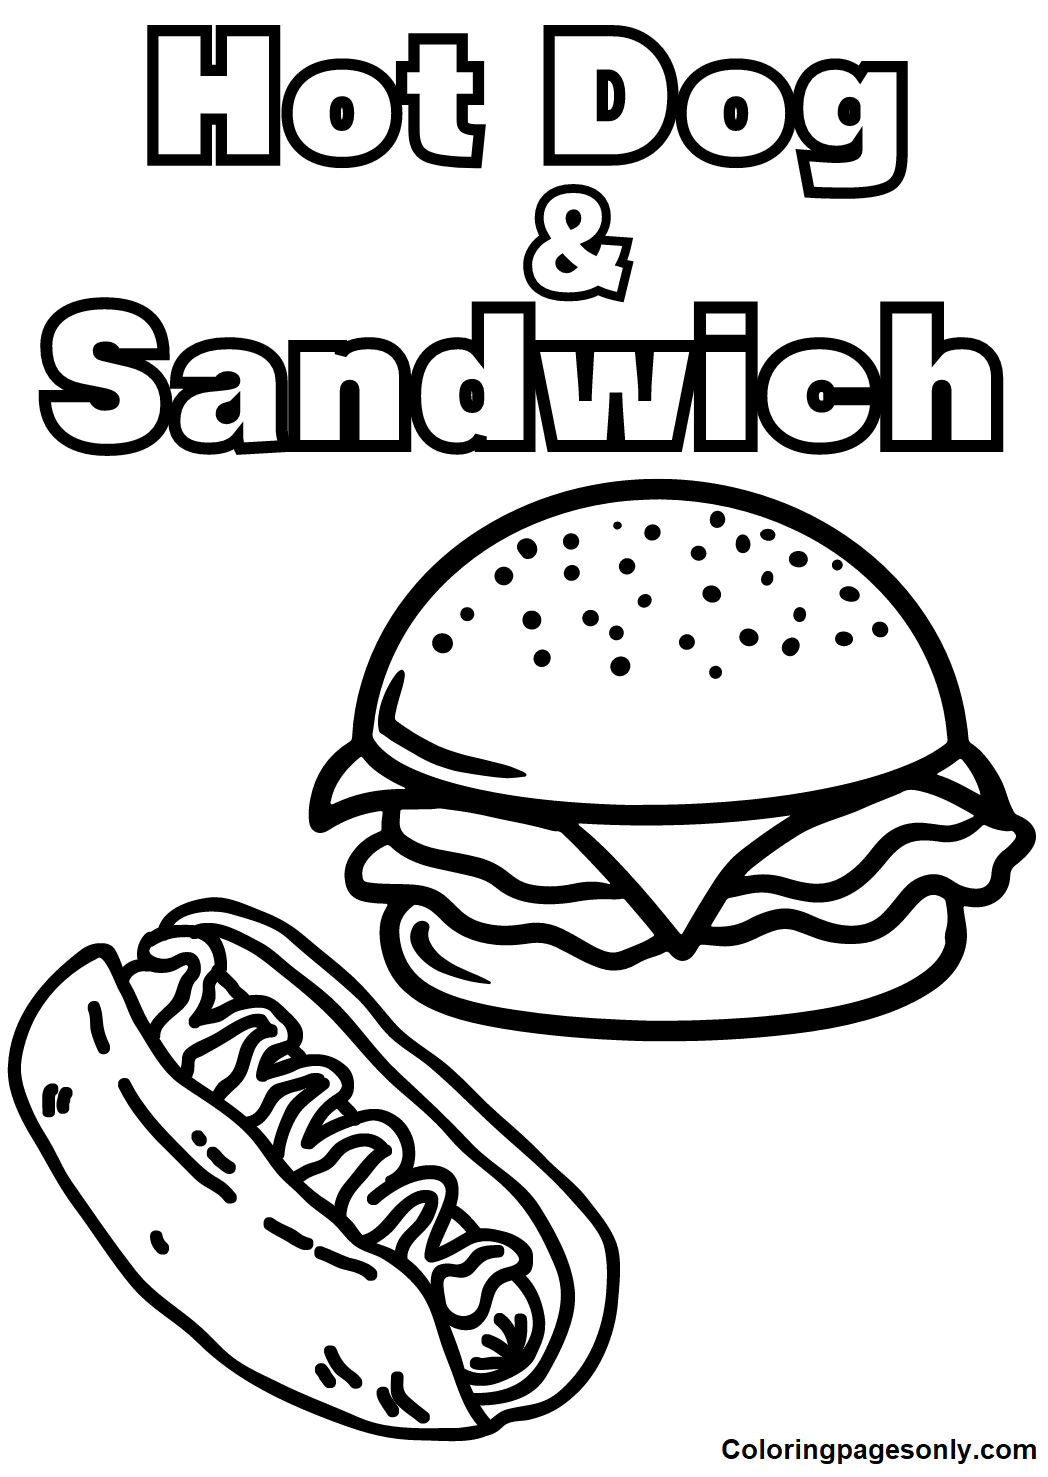 Hot Dog Sandwich Coloring Pages